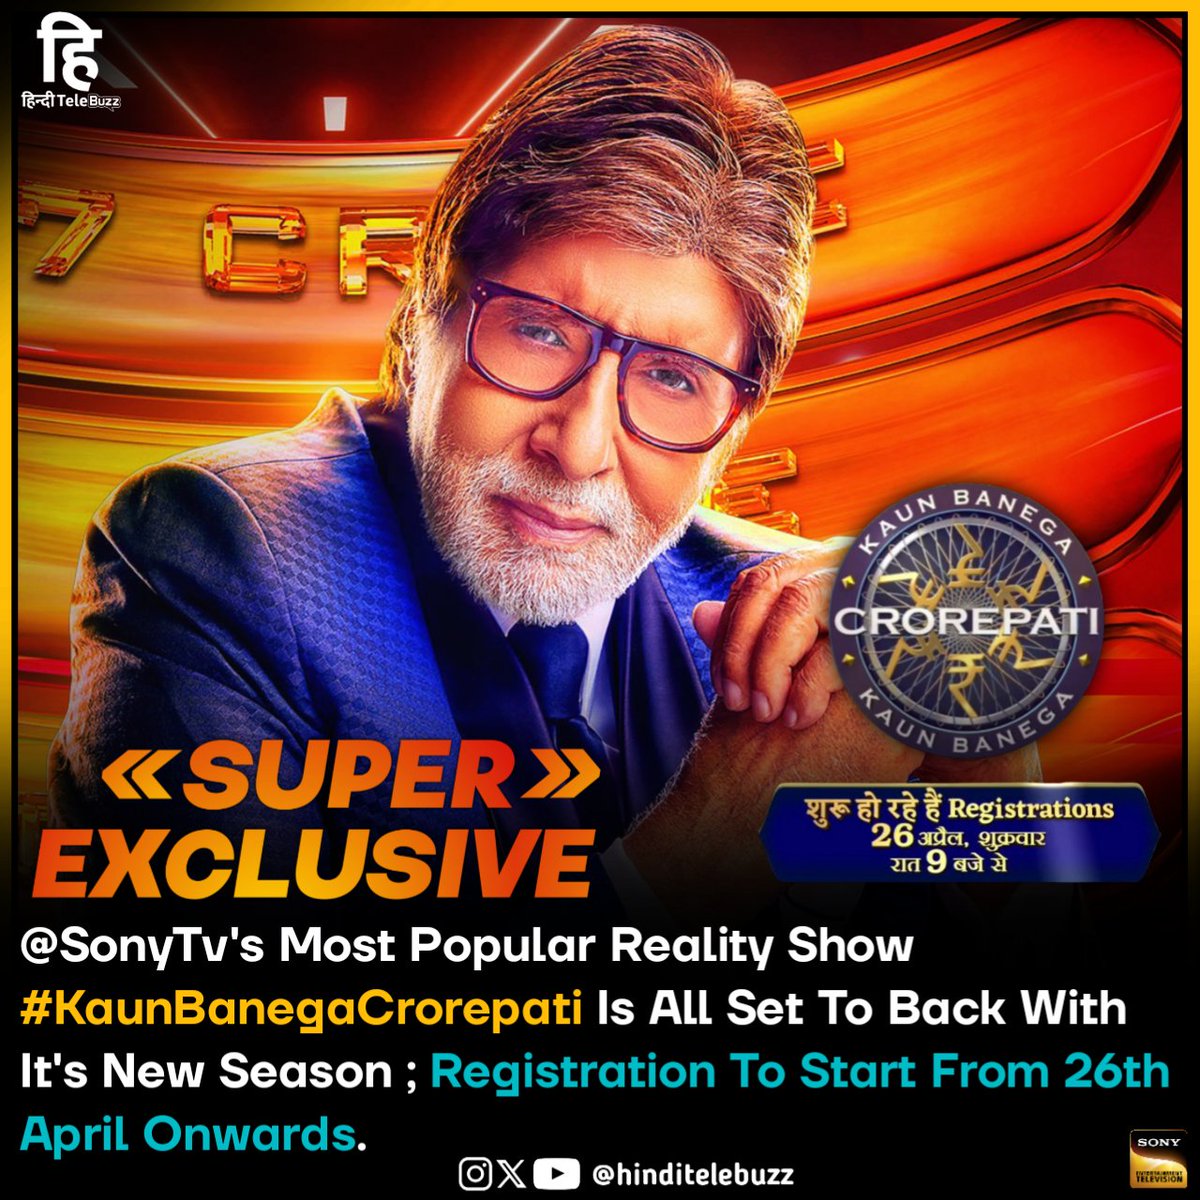 #SuperExclusive

@SonyTv's Most Popular Reality Show #KaunBanegaCrorepati Is All Set To Back With It's New Season ; Registration To Start From 26th April Onwards. 

@hinditelebuzz